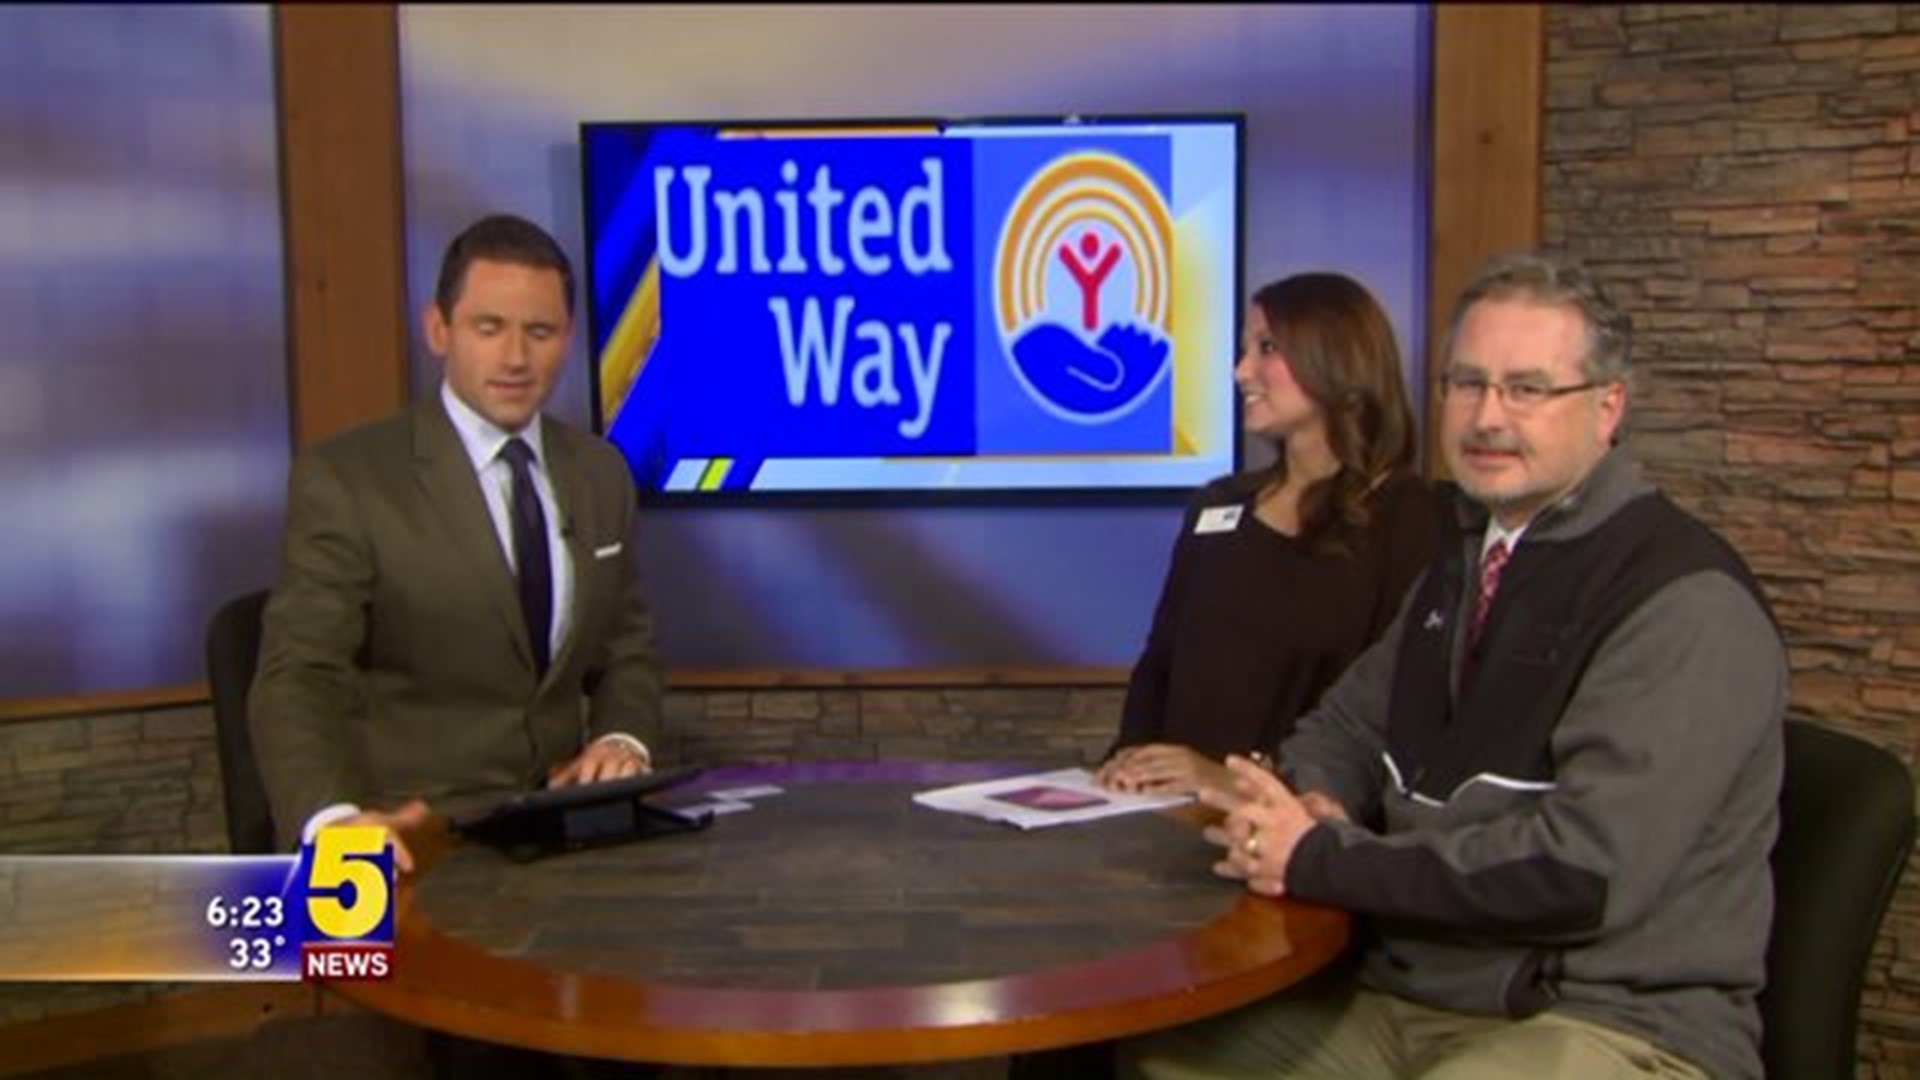 United Way of Fort Smith